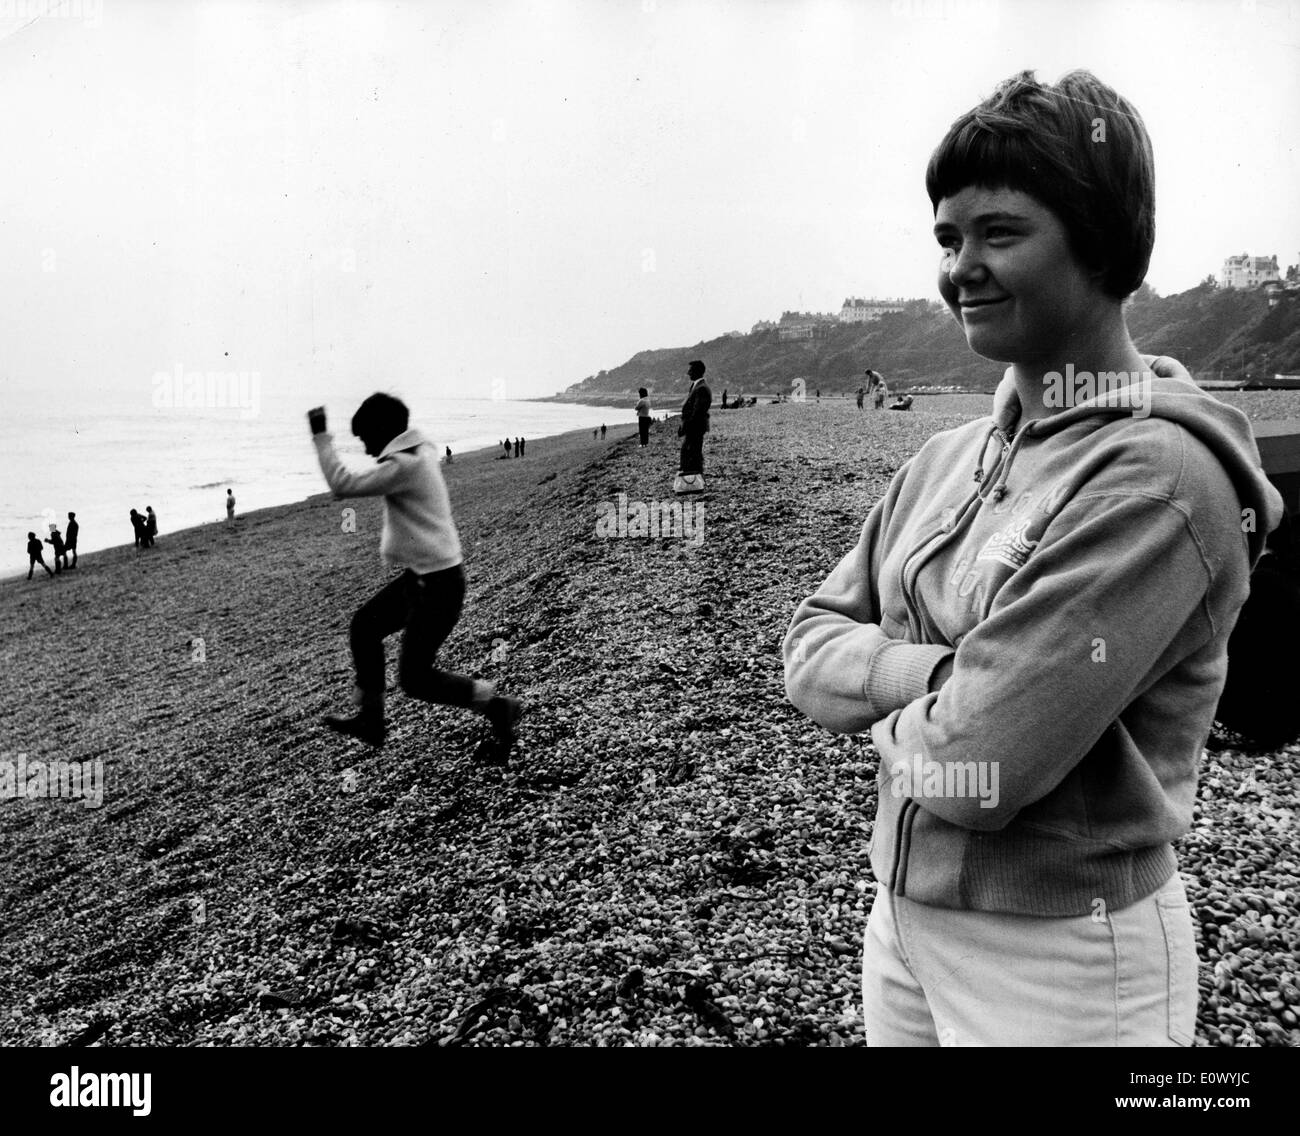 Swimmer Leonora Modell came to swim the English Channel Stock Photo